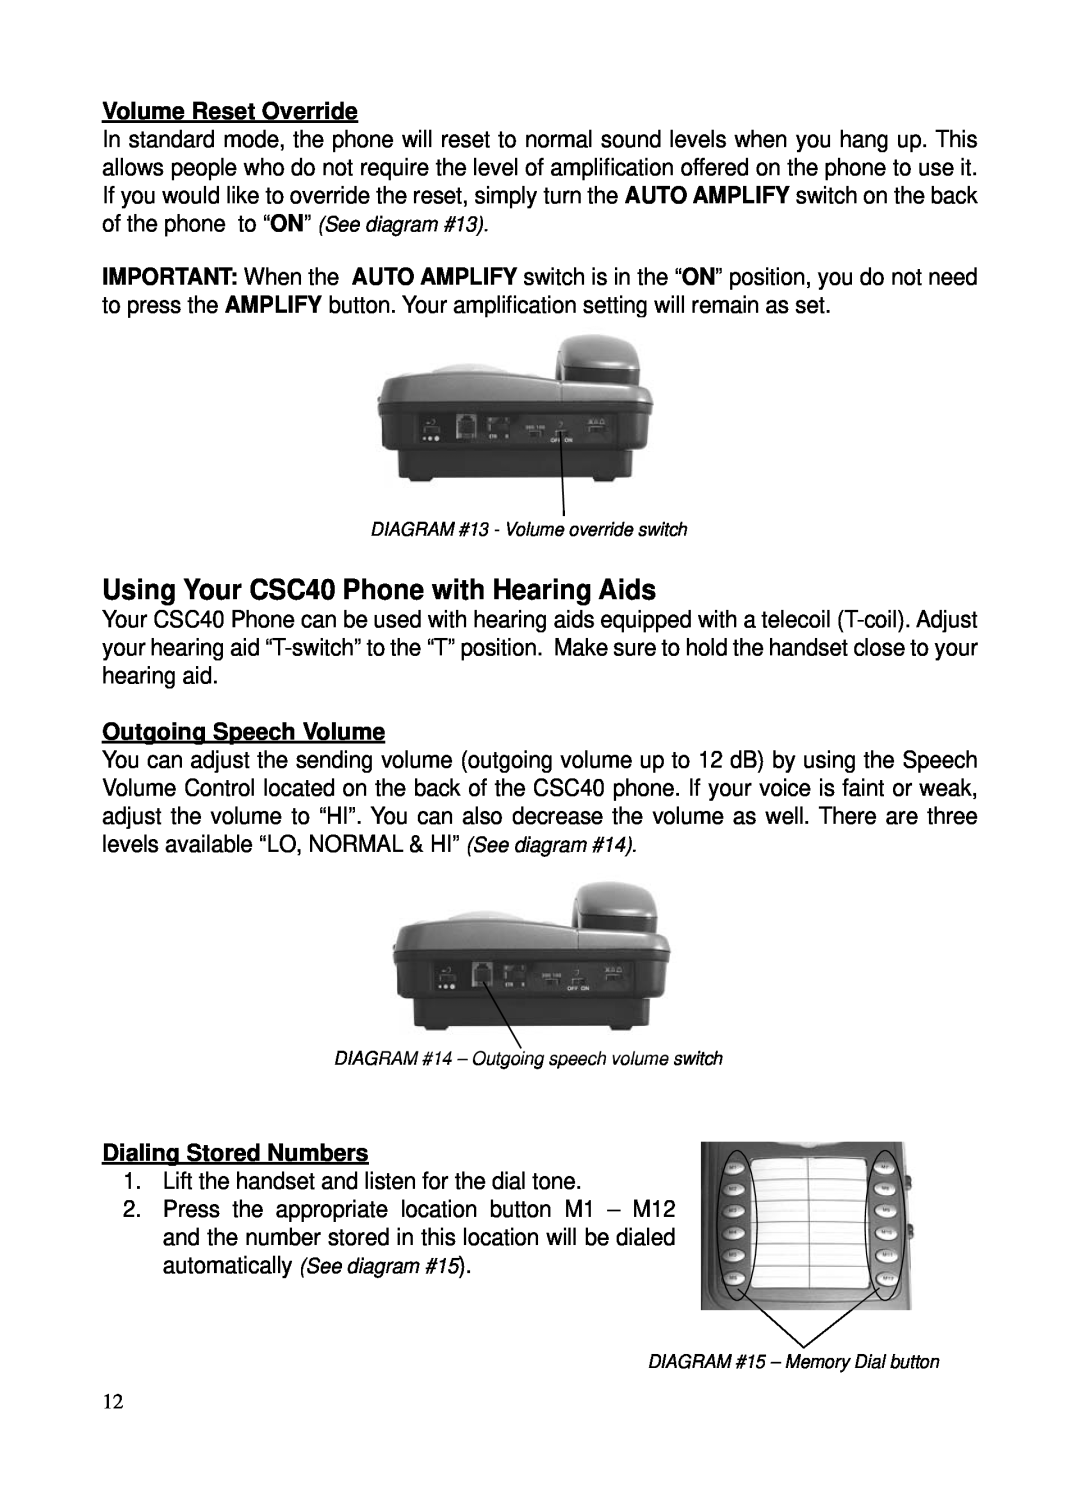 ClearSounds user manual Using Your CSC40 Phone with Hearing Aids, Volume Reset Override, Outgoing Speech Volume 